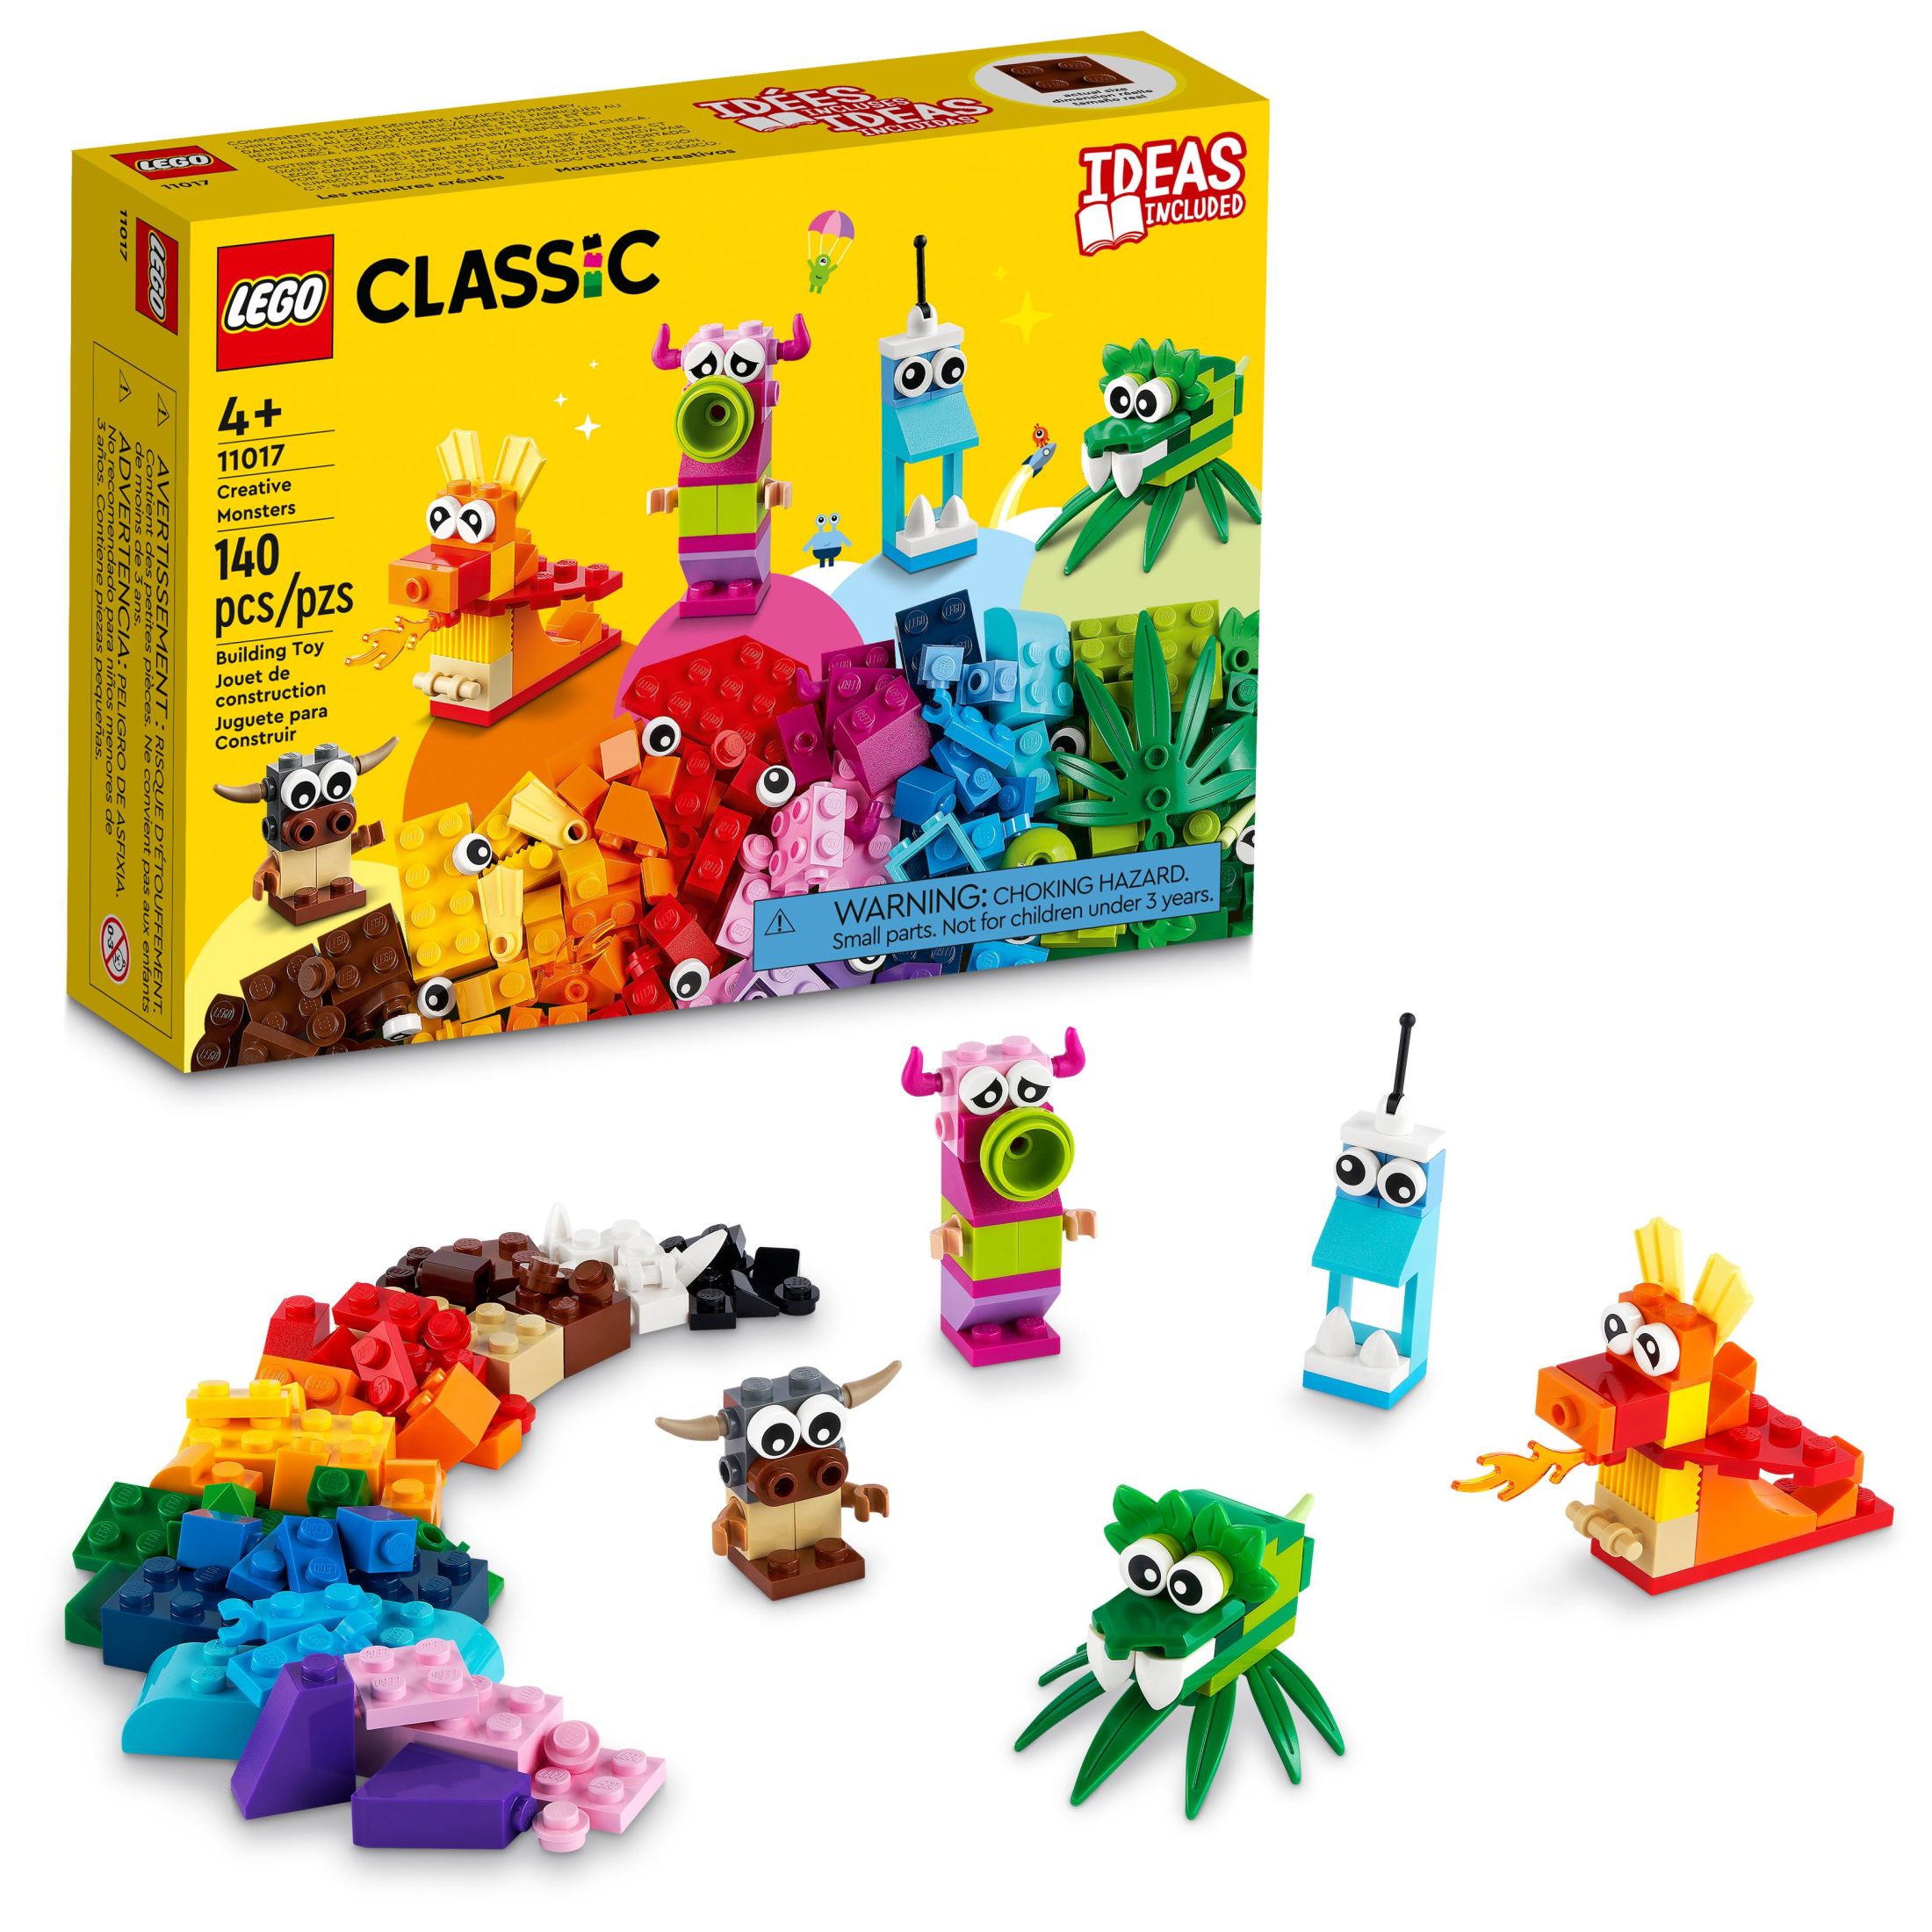 LEGO Classic Creative Monsters 11017 Building Kit, Includes 5 Monster Toy Mini Build Ideas to Inspire Creative Play for Kids Ages 4 and Up, Children can Build and Be Inspired by LEGO Masters - image 1 of 8